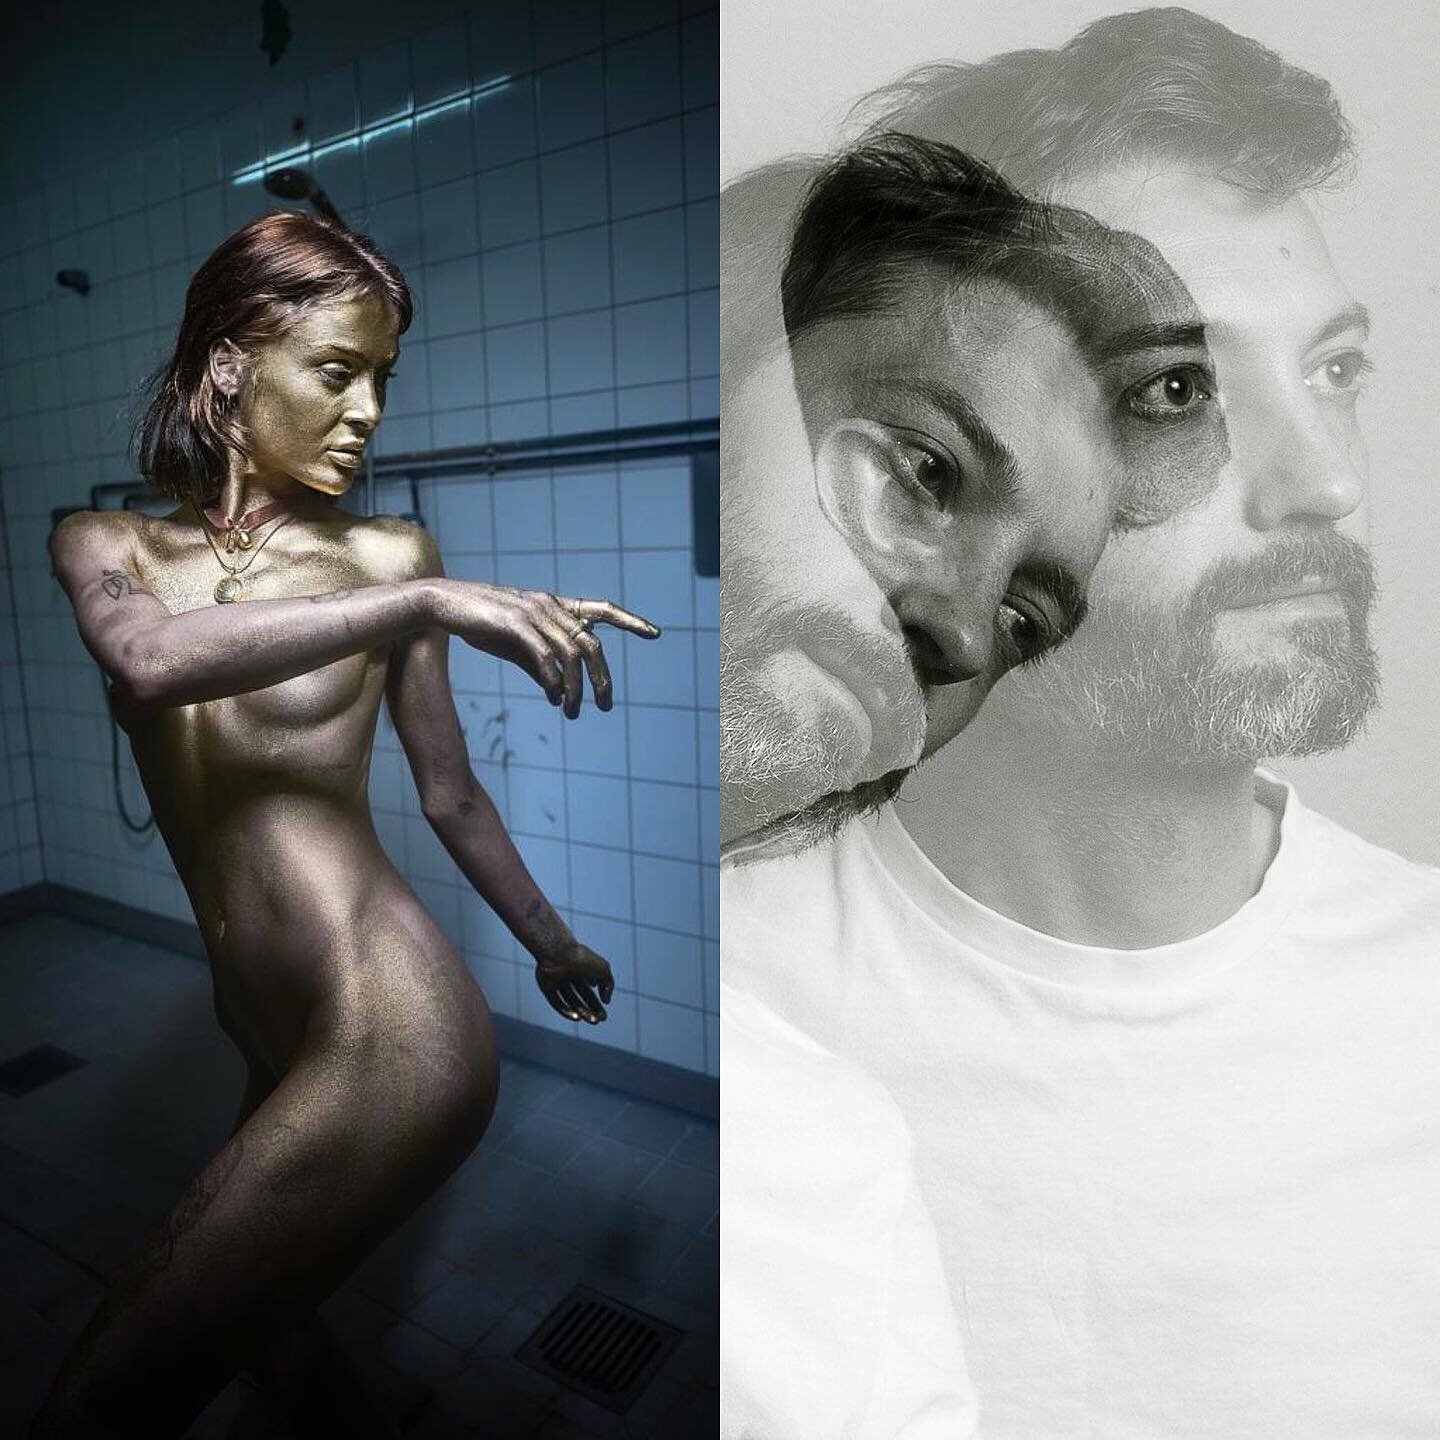 Artists introduction for our next show &bdquo;Gold&ldquo; - Sentient Society this Friday !

@mariami_aianadi 
Mariam Aianadi is a Butoh dancer. She learned from Minako Seki and Yuko Kaseki.

She provides insights into the history of&nbsp;Butoh&nbsp;a